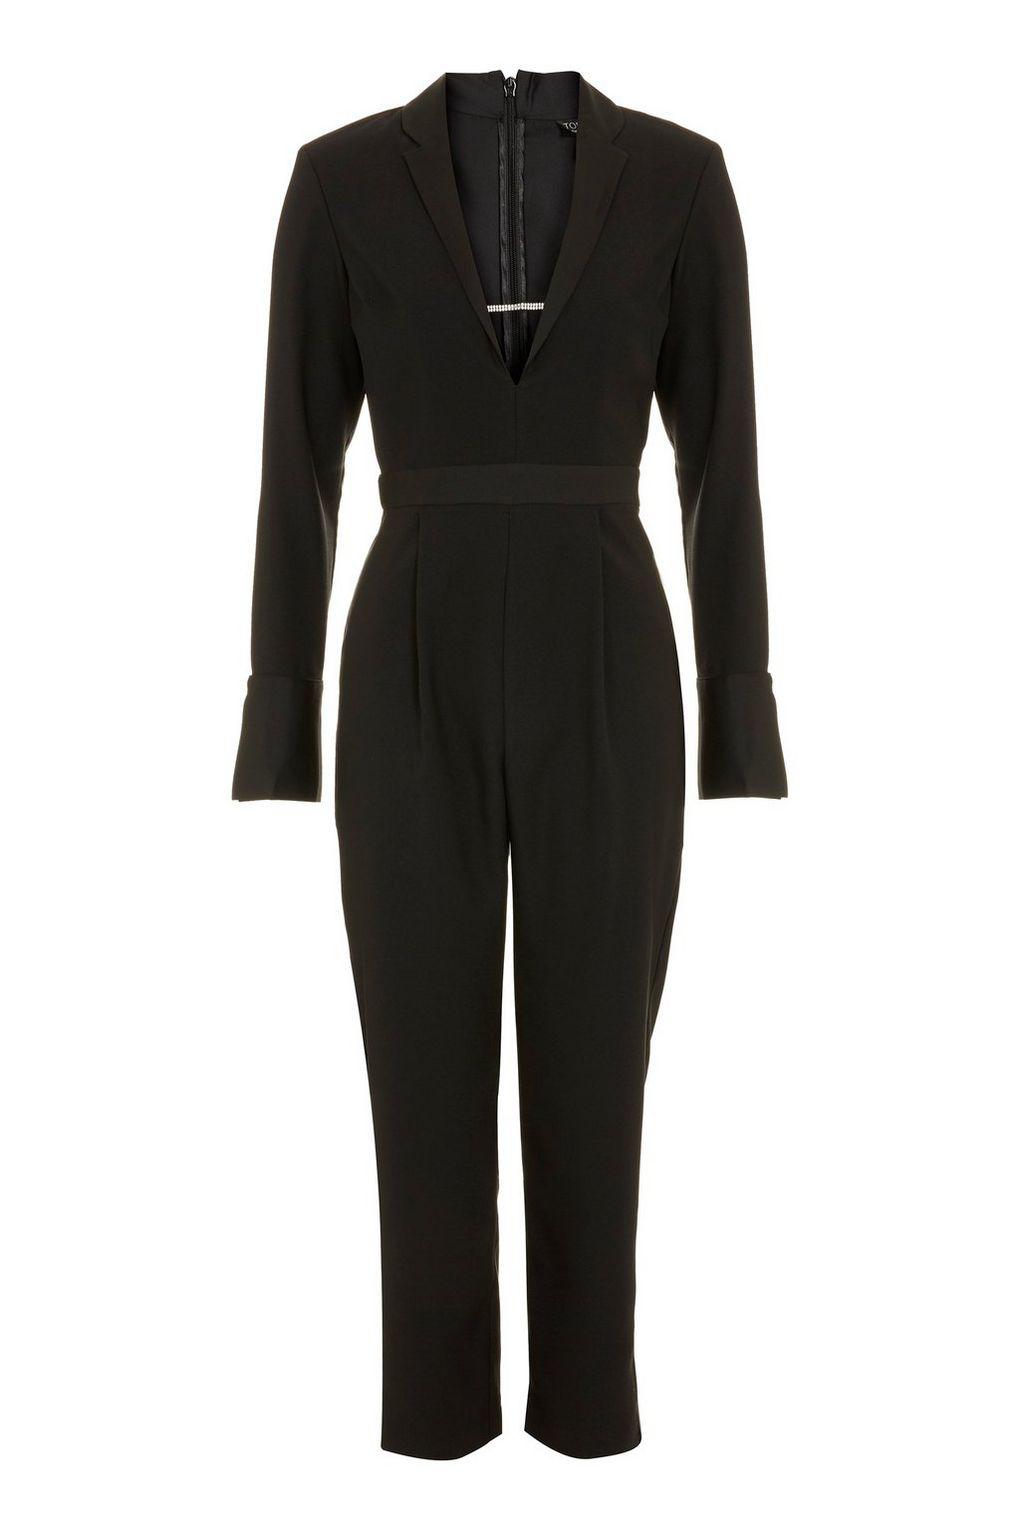 TOPSHOP Synthetic Tuxedo Jumpsuit in Black - Lyst